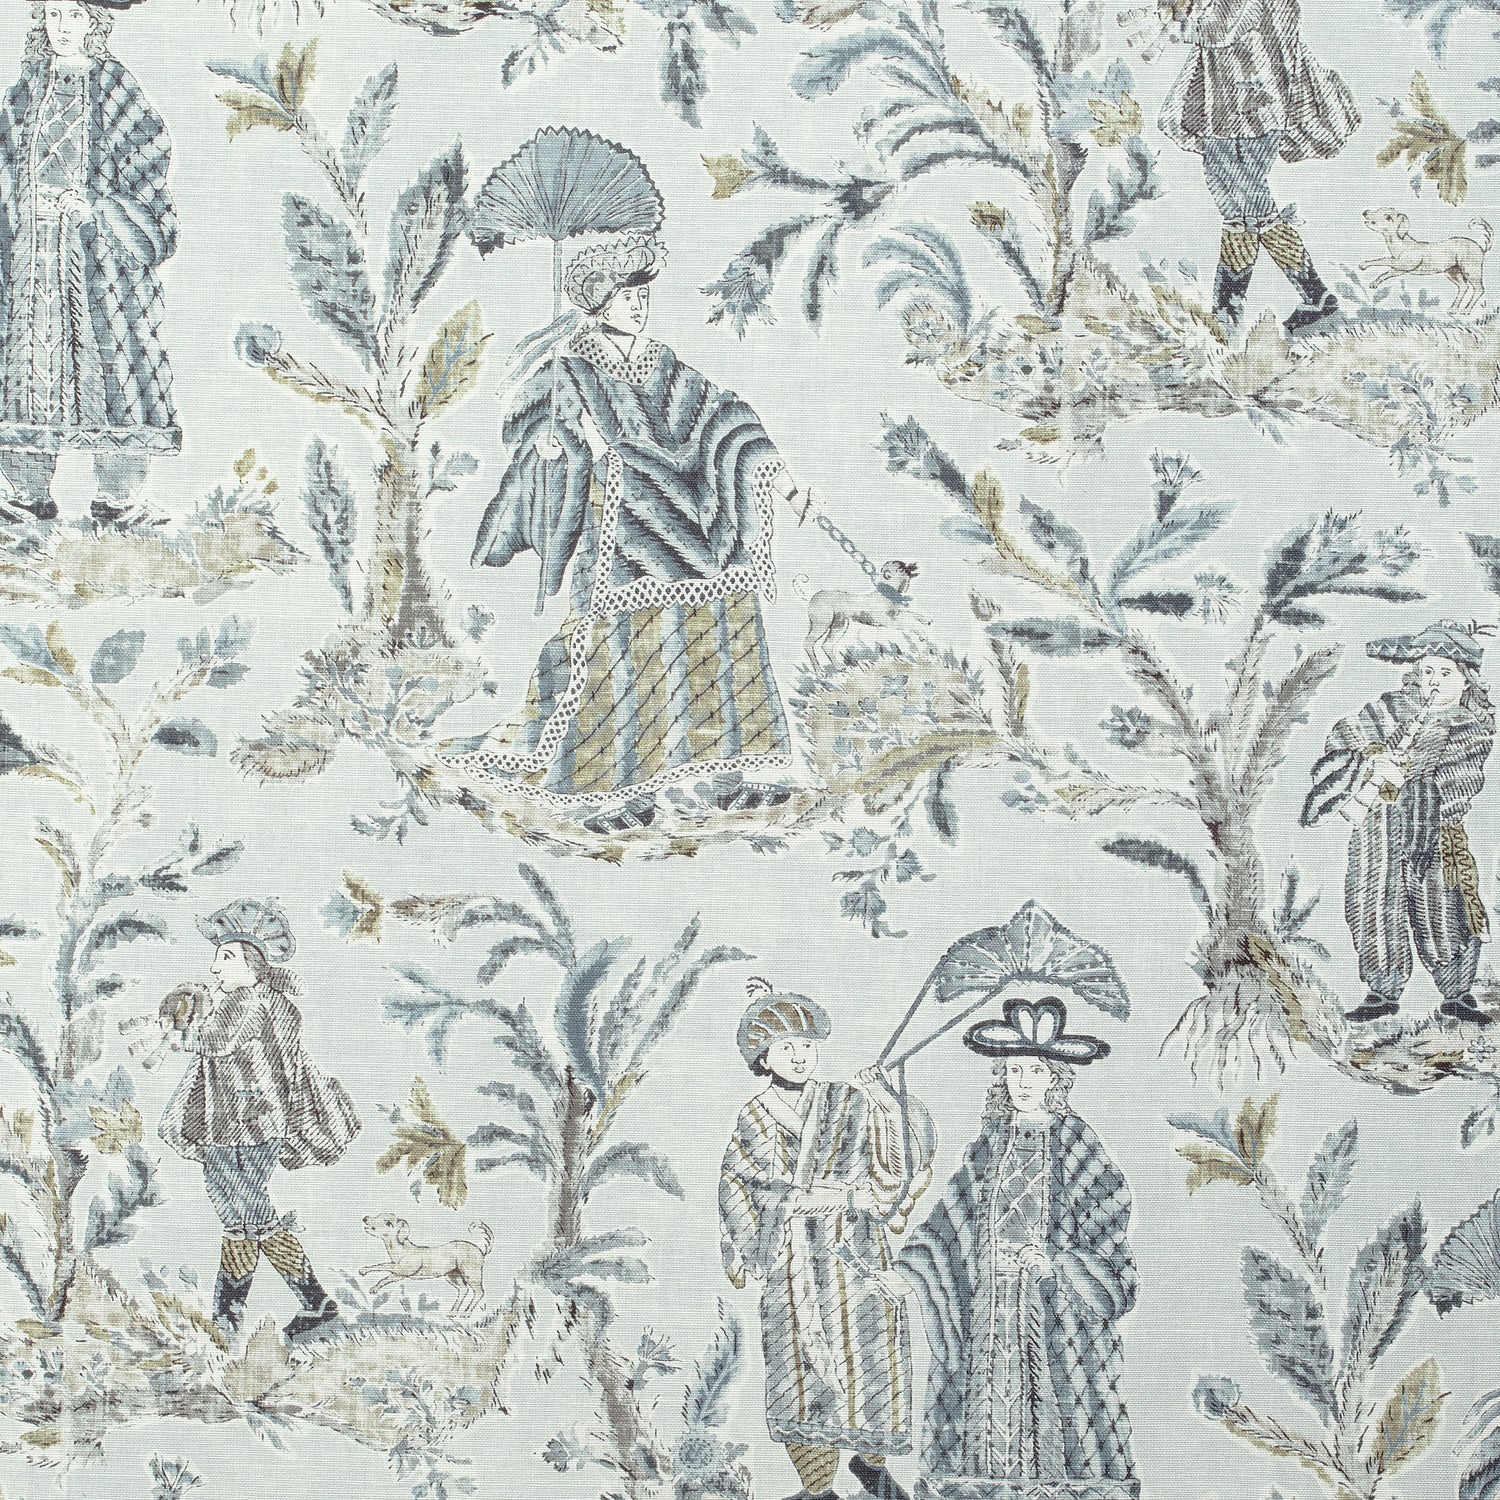 Royale Toile fabric in grey color - pattern number F972576 - by Thibaut in the Chestnut Hill collection